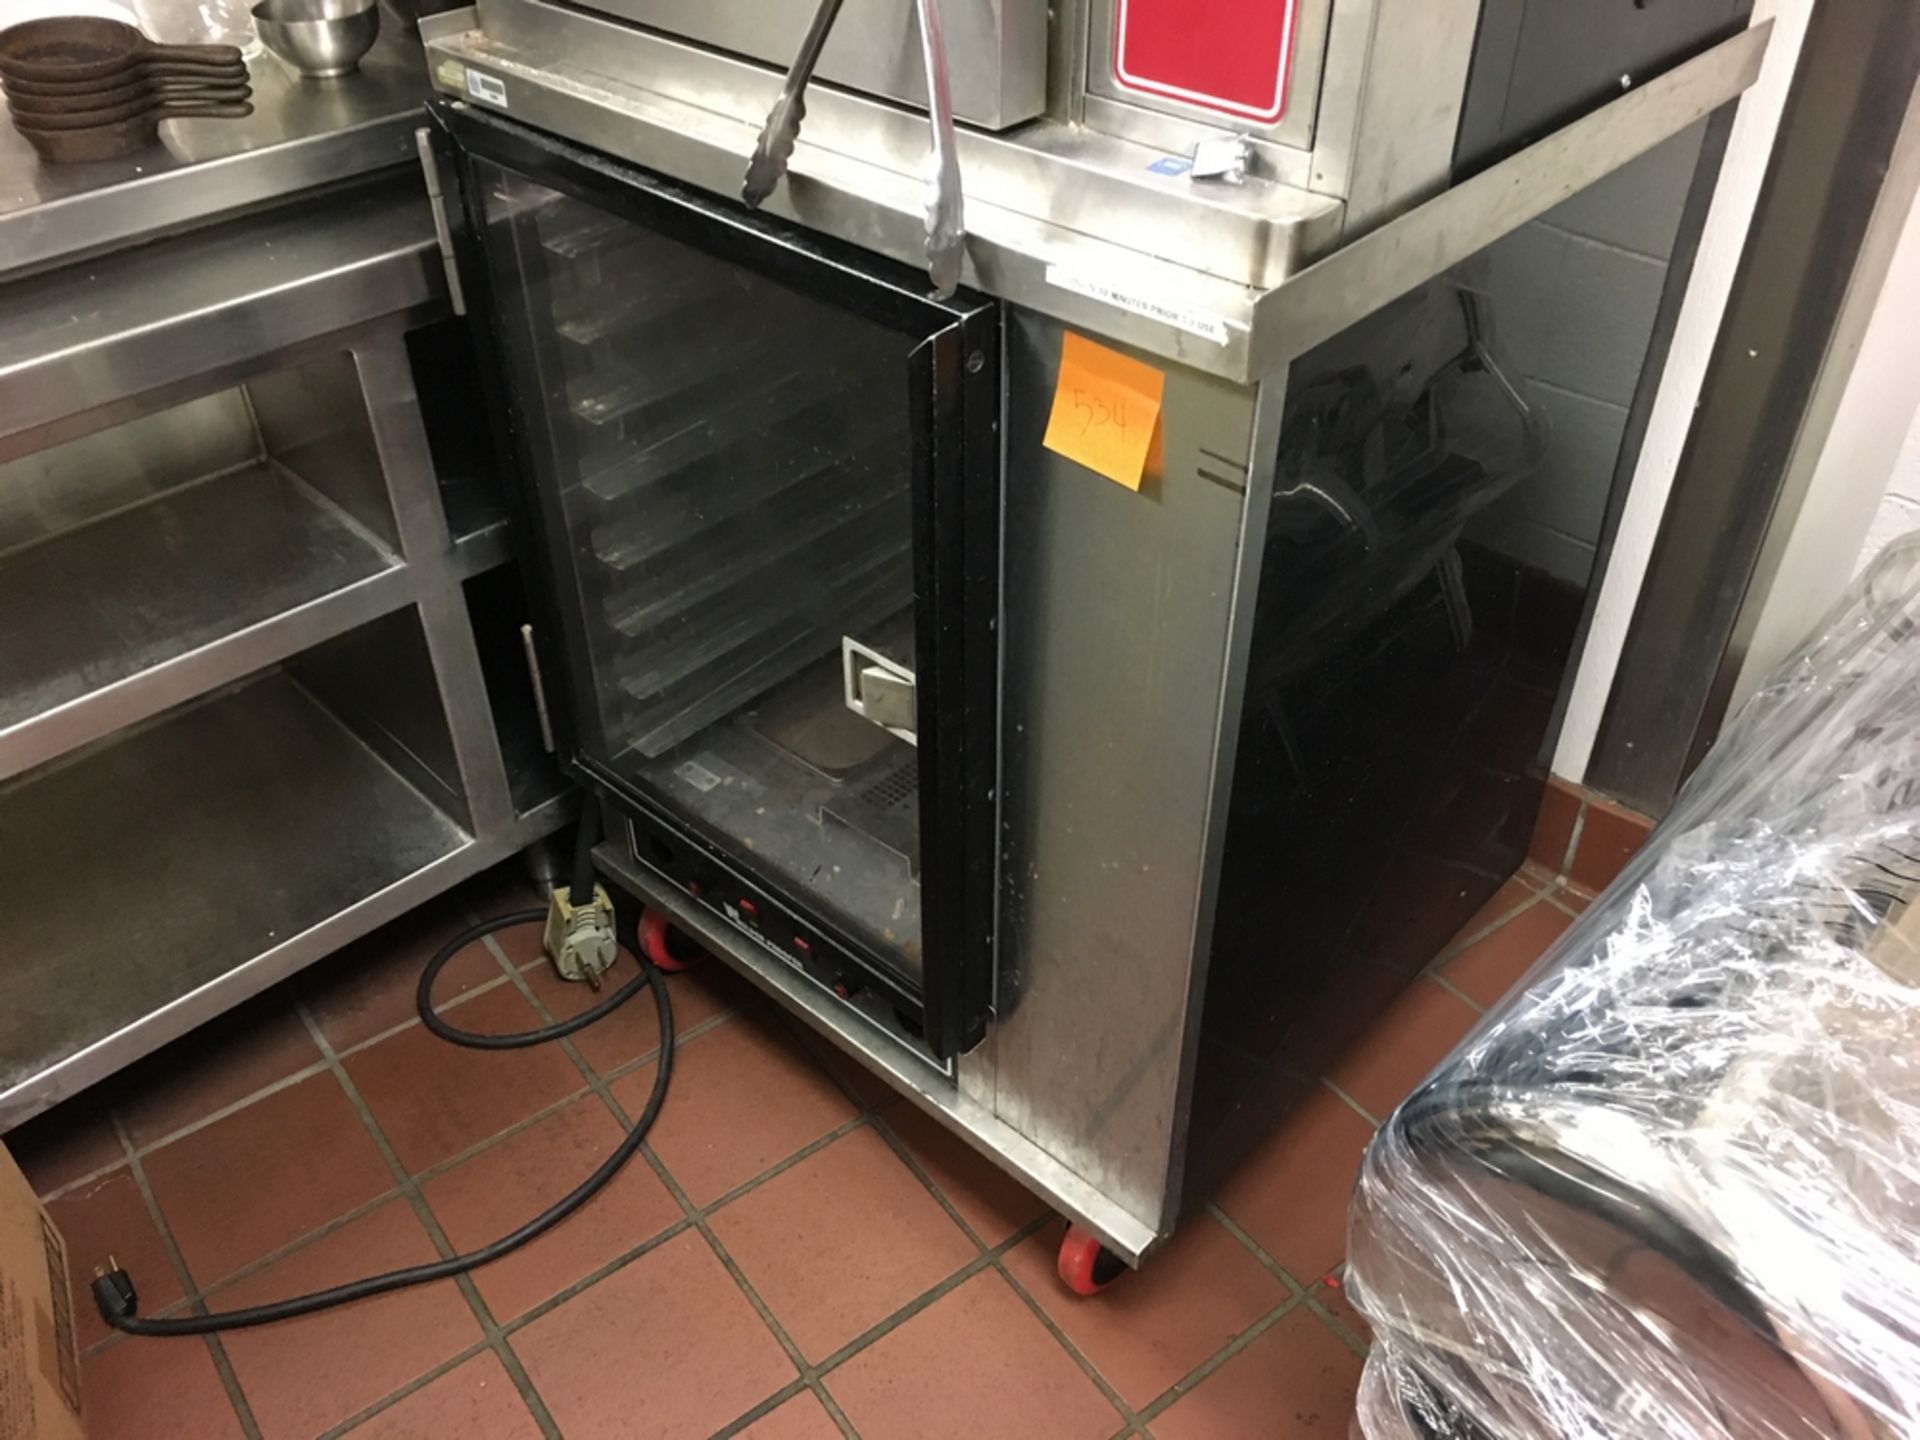 SS Proofer, Wilder, 2 1/2 ft x 2 1/2 ft x 3 ft t Located: Main Kitchen, adjacent to Palace Grill